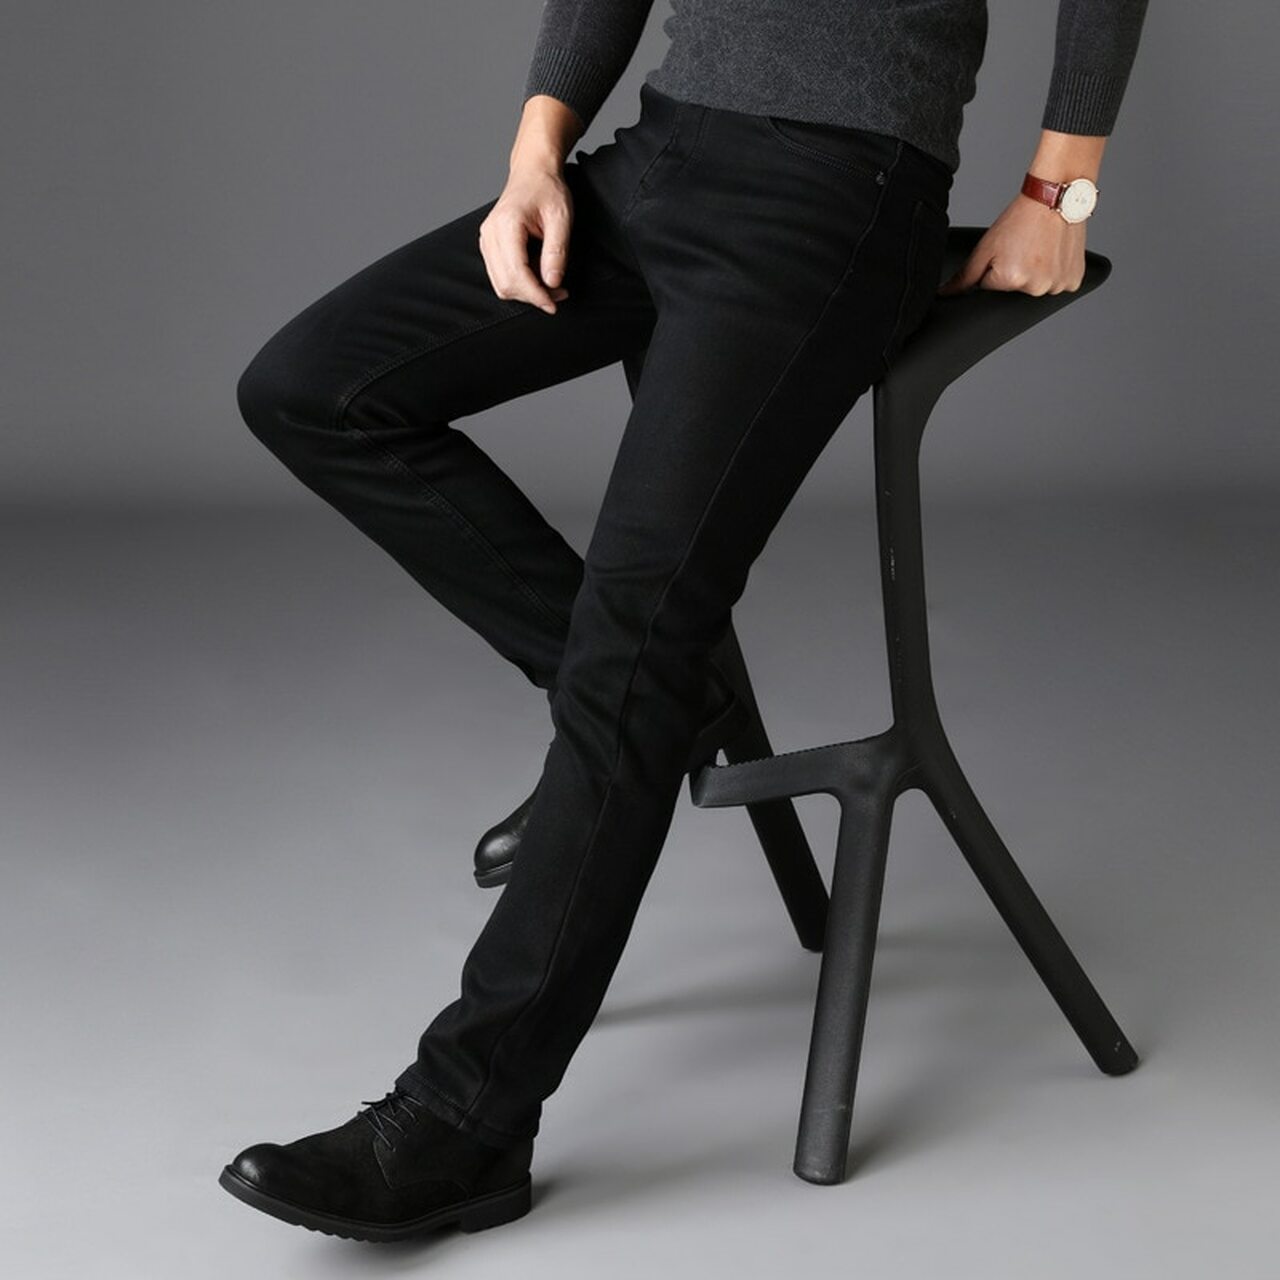 Stretch Jeans- Key Features Of The Stylish Denim